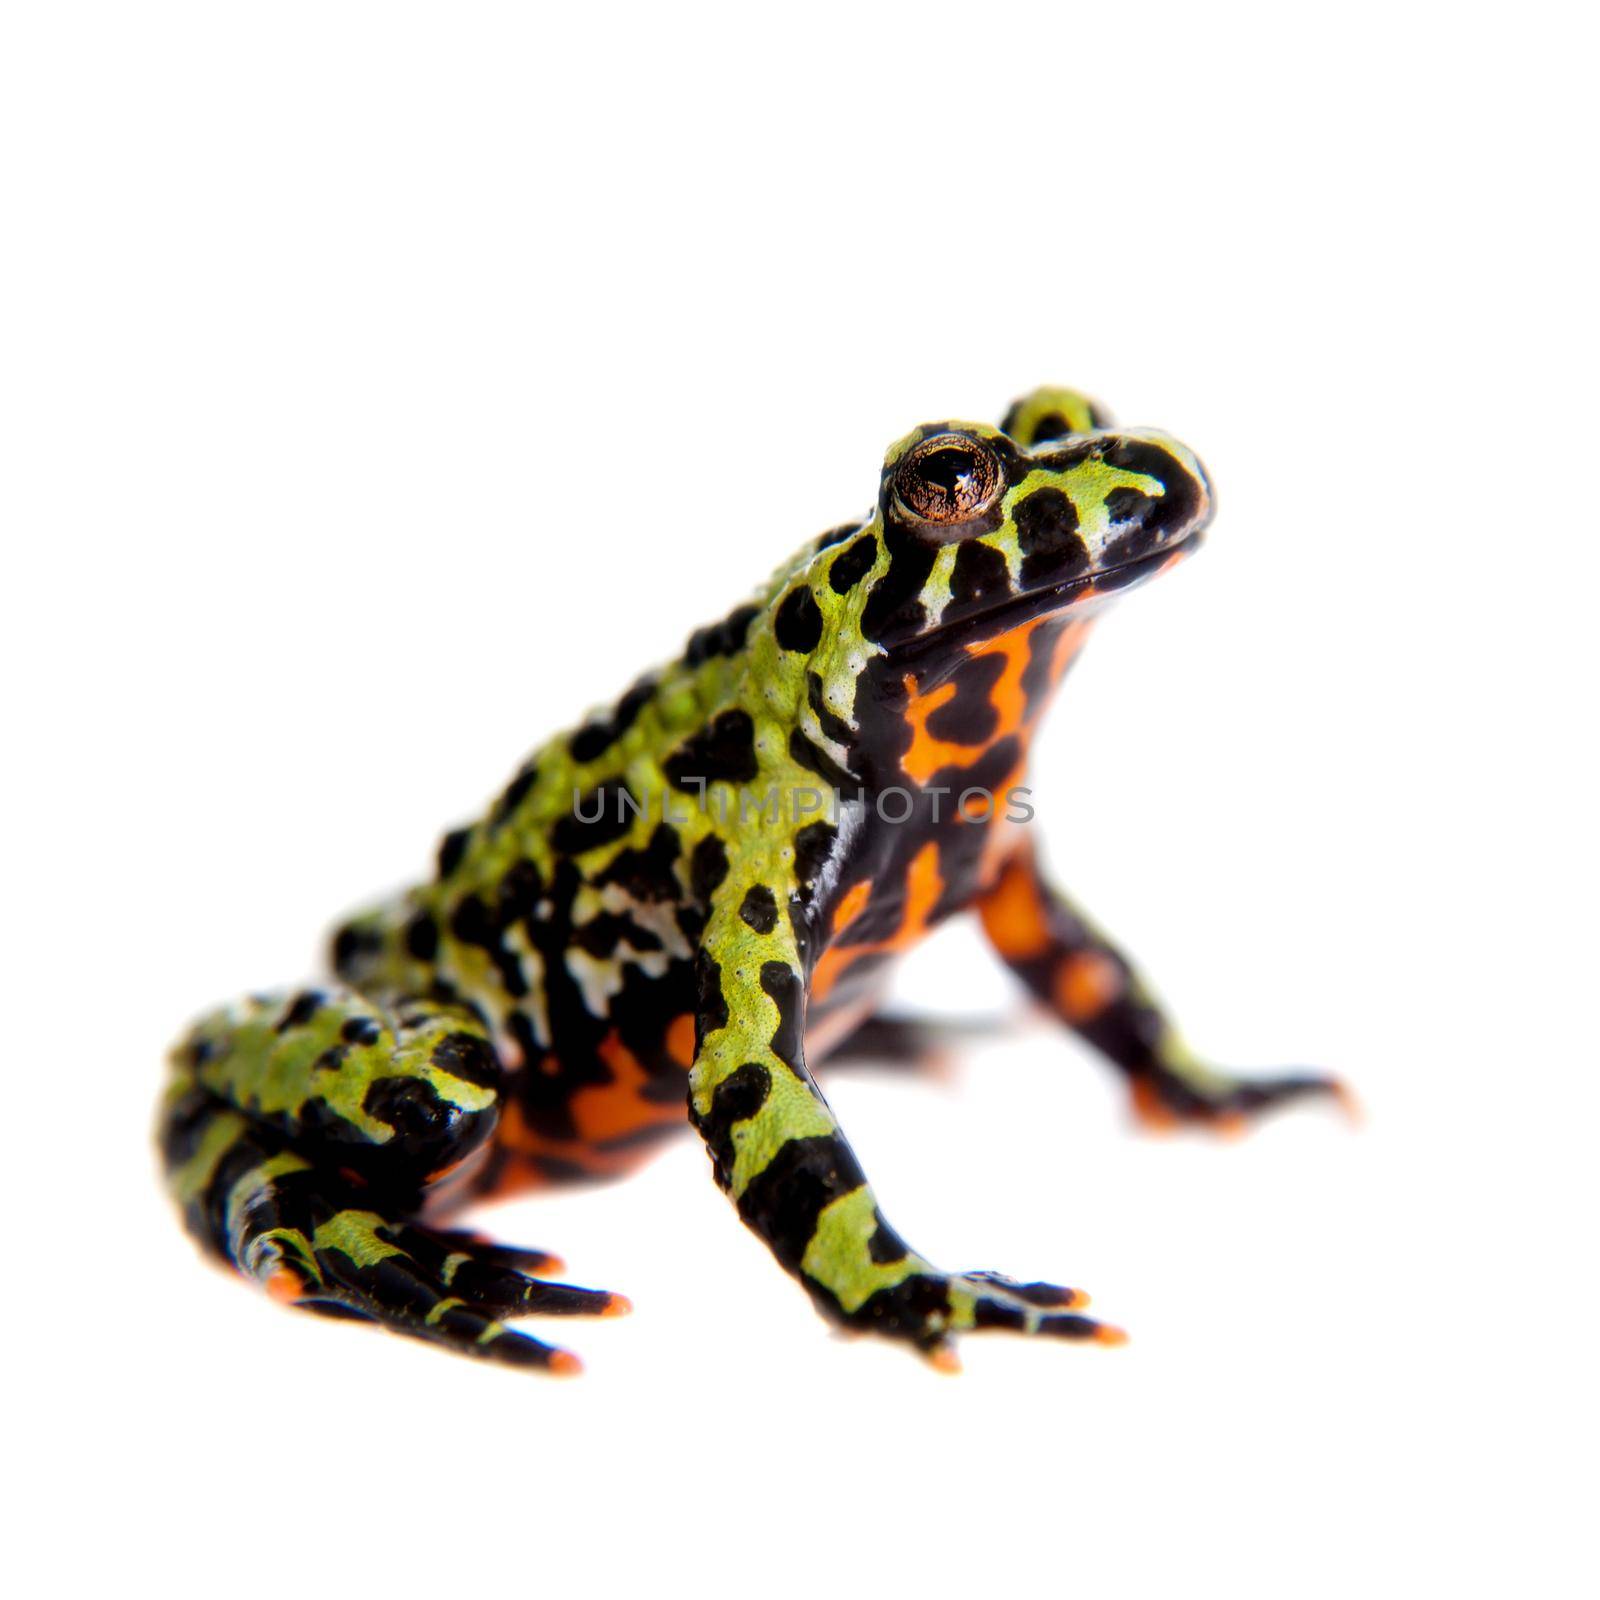 Oriental Fire-bellied Toad, Bombina orientalis, isolated on white background